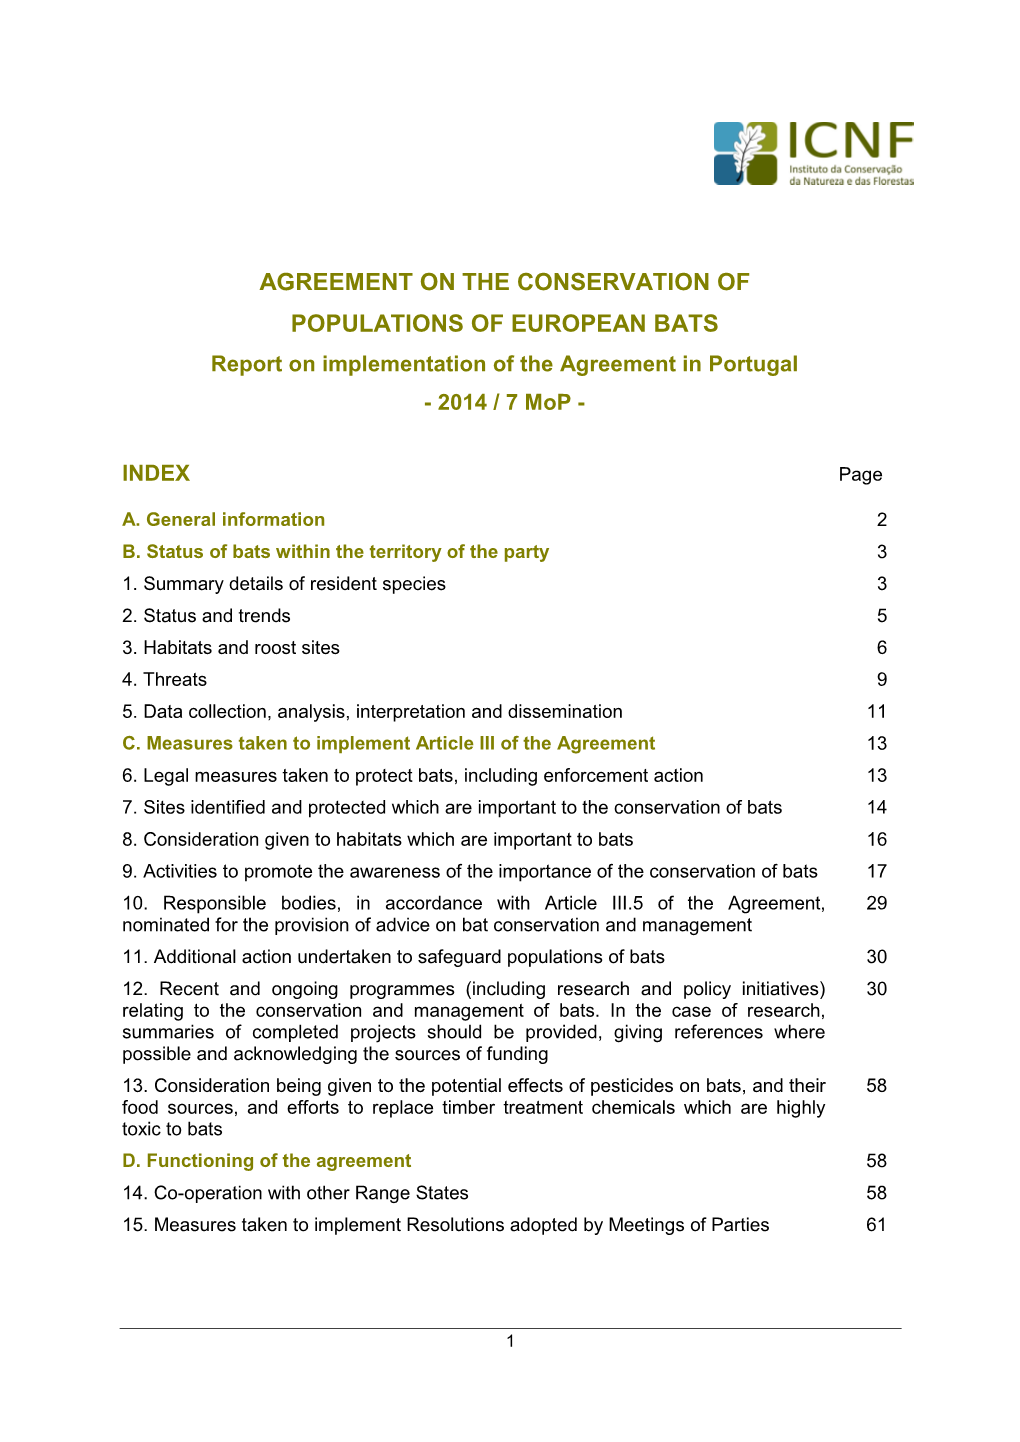 AGREEMENT on the CONSERVATION of POPULATIONS of EUROPEAN BATS Report on Implementation of the Agreement in Portugal - 2014 / 7 Mop